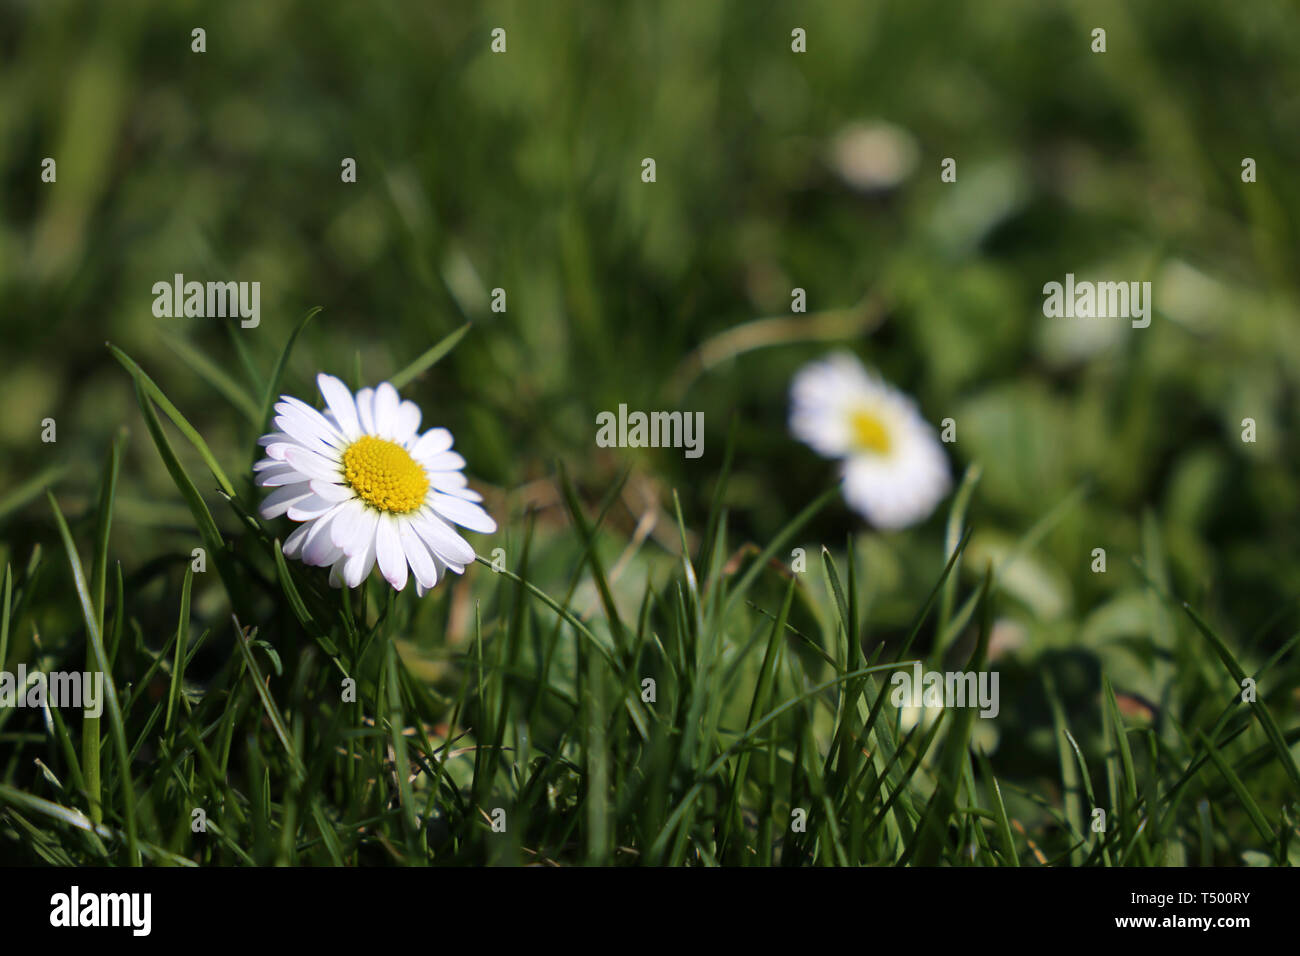 Chamomile flowers in the green grass. White daisies on sunny meadow, spring season background Stock Photo